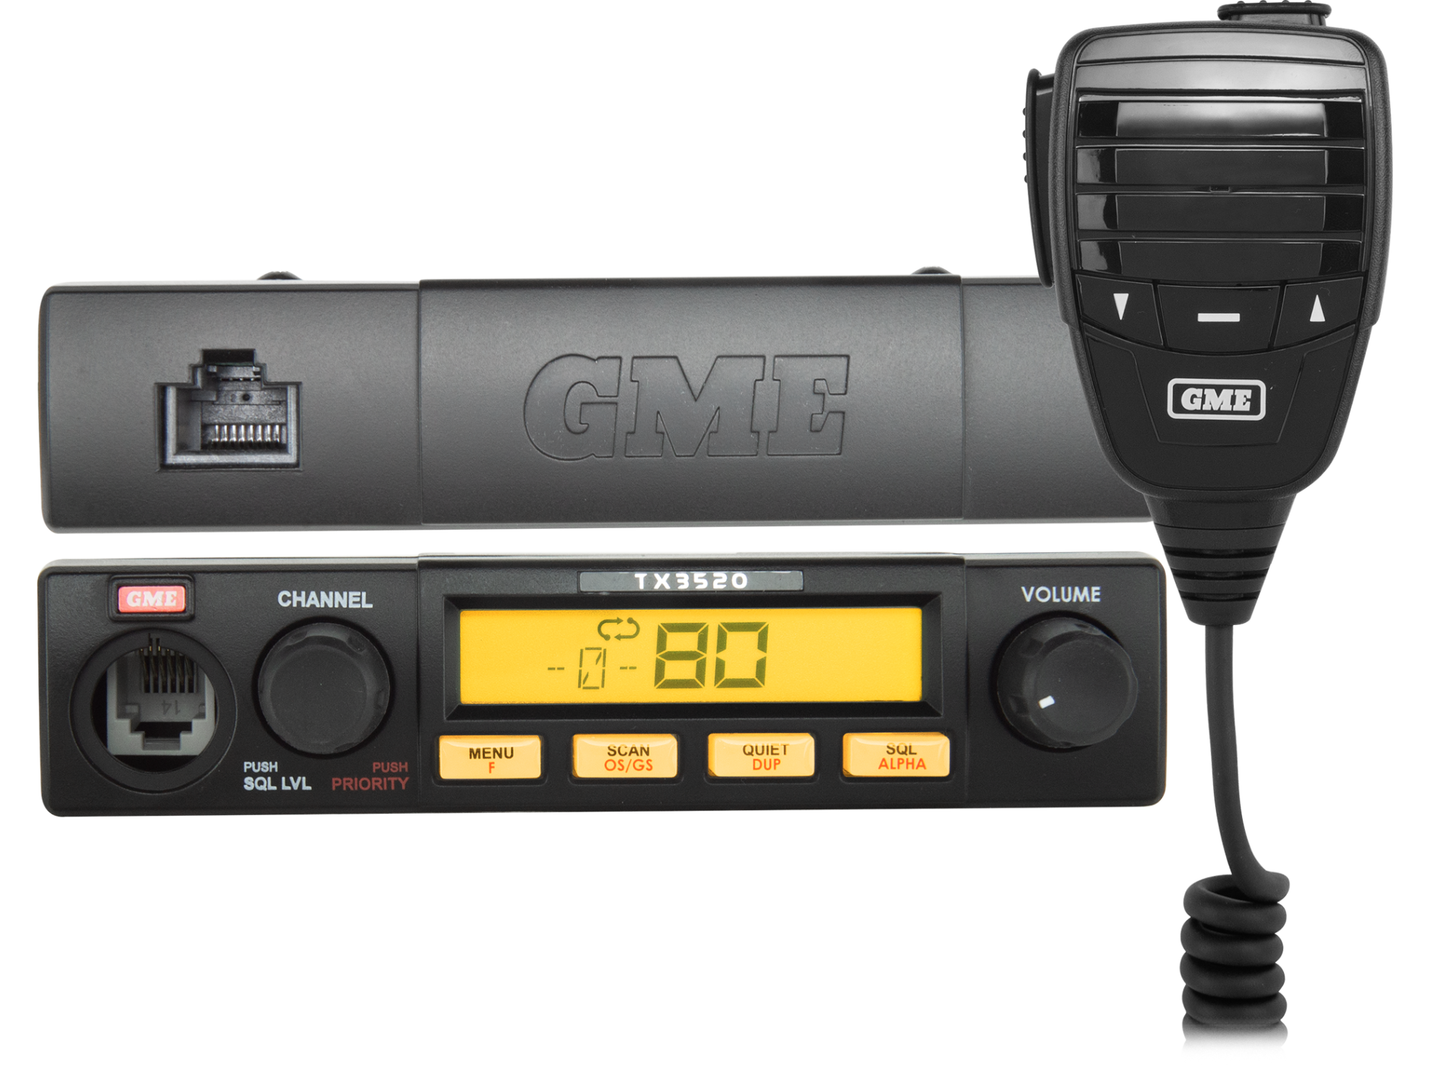 GME TX3520S UHF CB radio with Scansuite